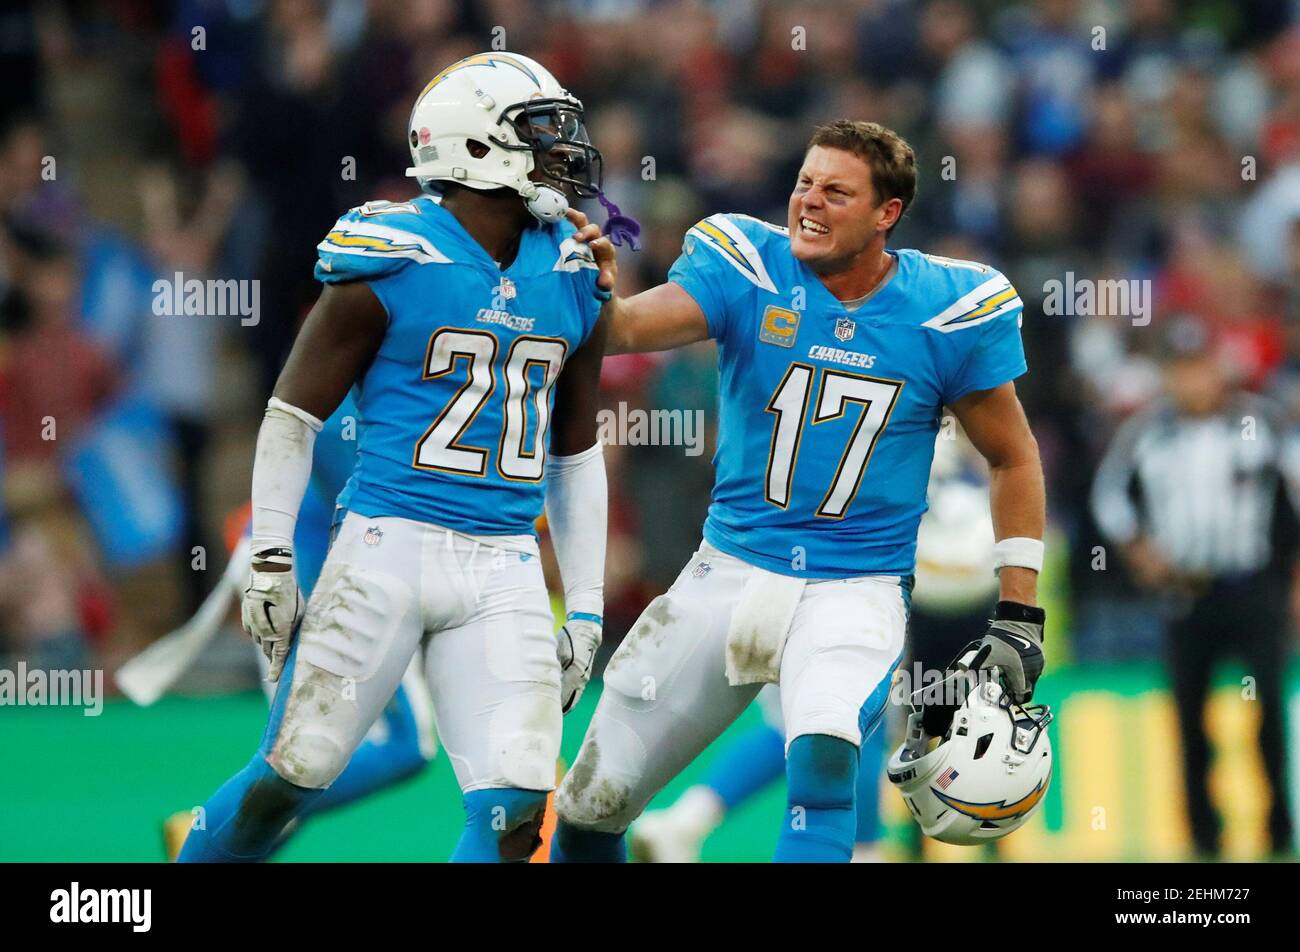 NFL Football - Tennessee Titans v Los Angeles Chargers - NFL International  Series - Wembley Stadium, London, Britain - October 21, 2018 Los Angeles  Chargers' Desmond King and Philip Rivers clebrate during